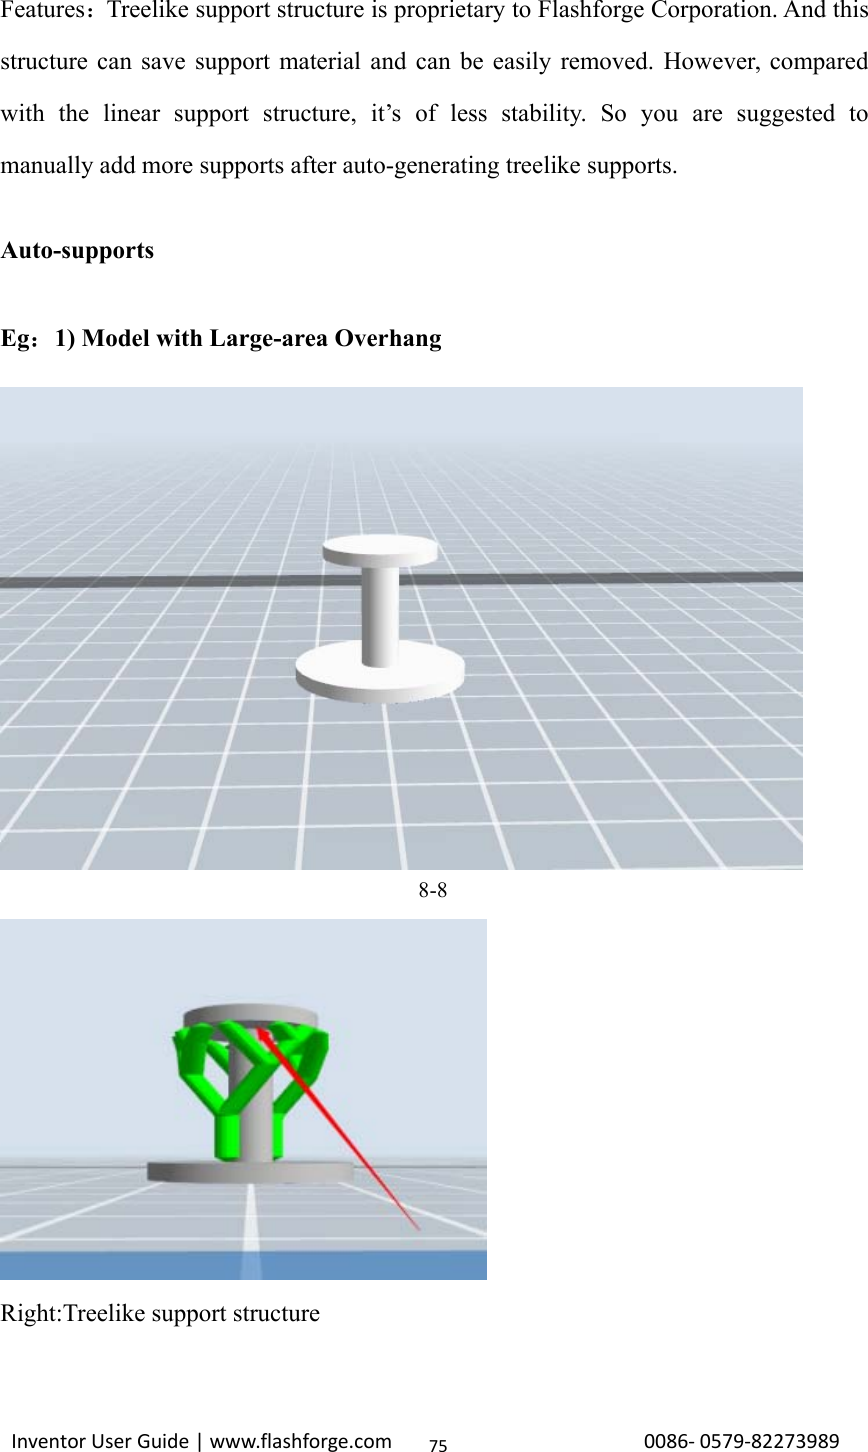 Inventor User Guide | www.flashforge.com 0086‐0579‐8227398975Features：Treelike support structure is proprietary to Flashforge Corporation. And thisstructure can save support material and can be easily removed. However, comparedwith the linear support structure, it’s of less stability. So you are suggested tomanually add more supports after auto-generating treelike supports.Auto-supportsEg：1) Model with Large-area Overhang8-8Right:Treelike support structure